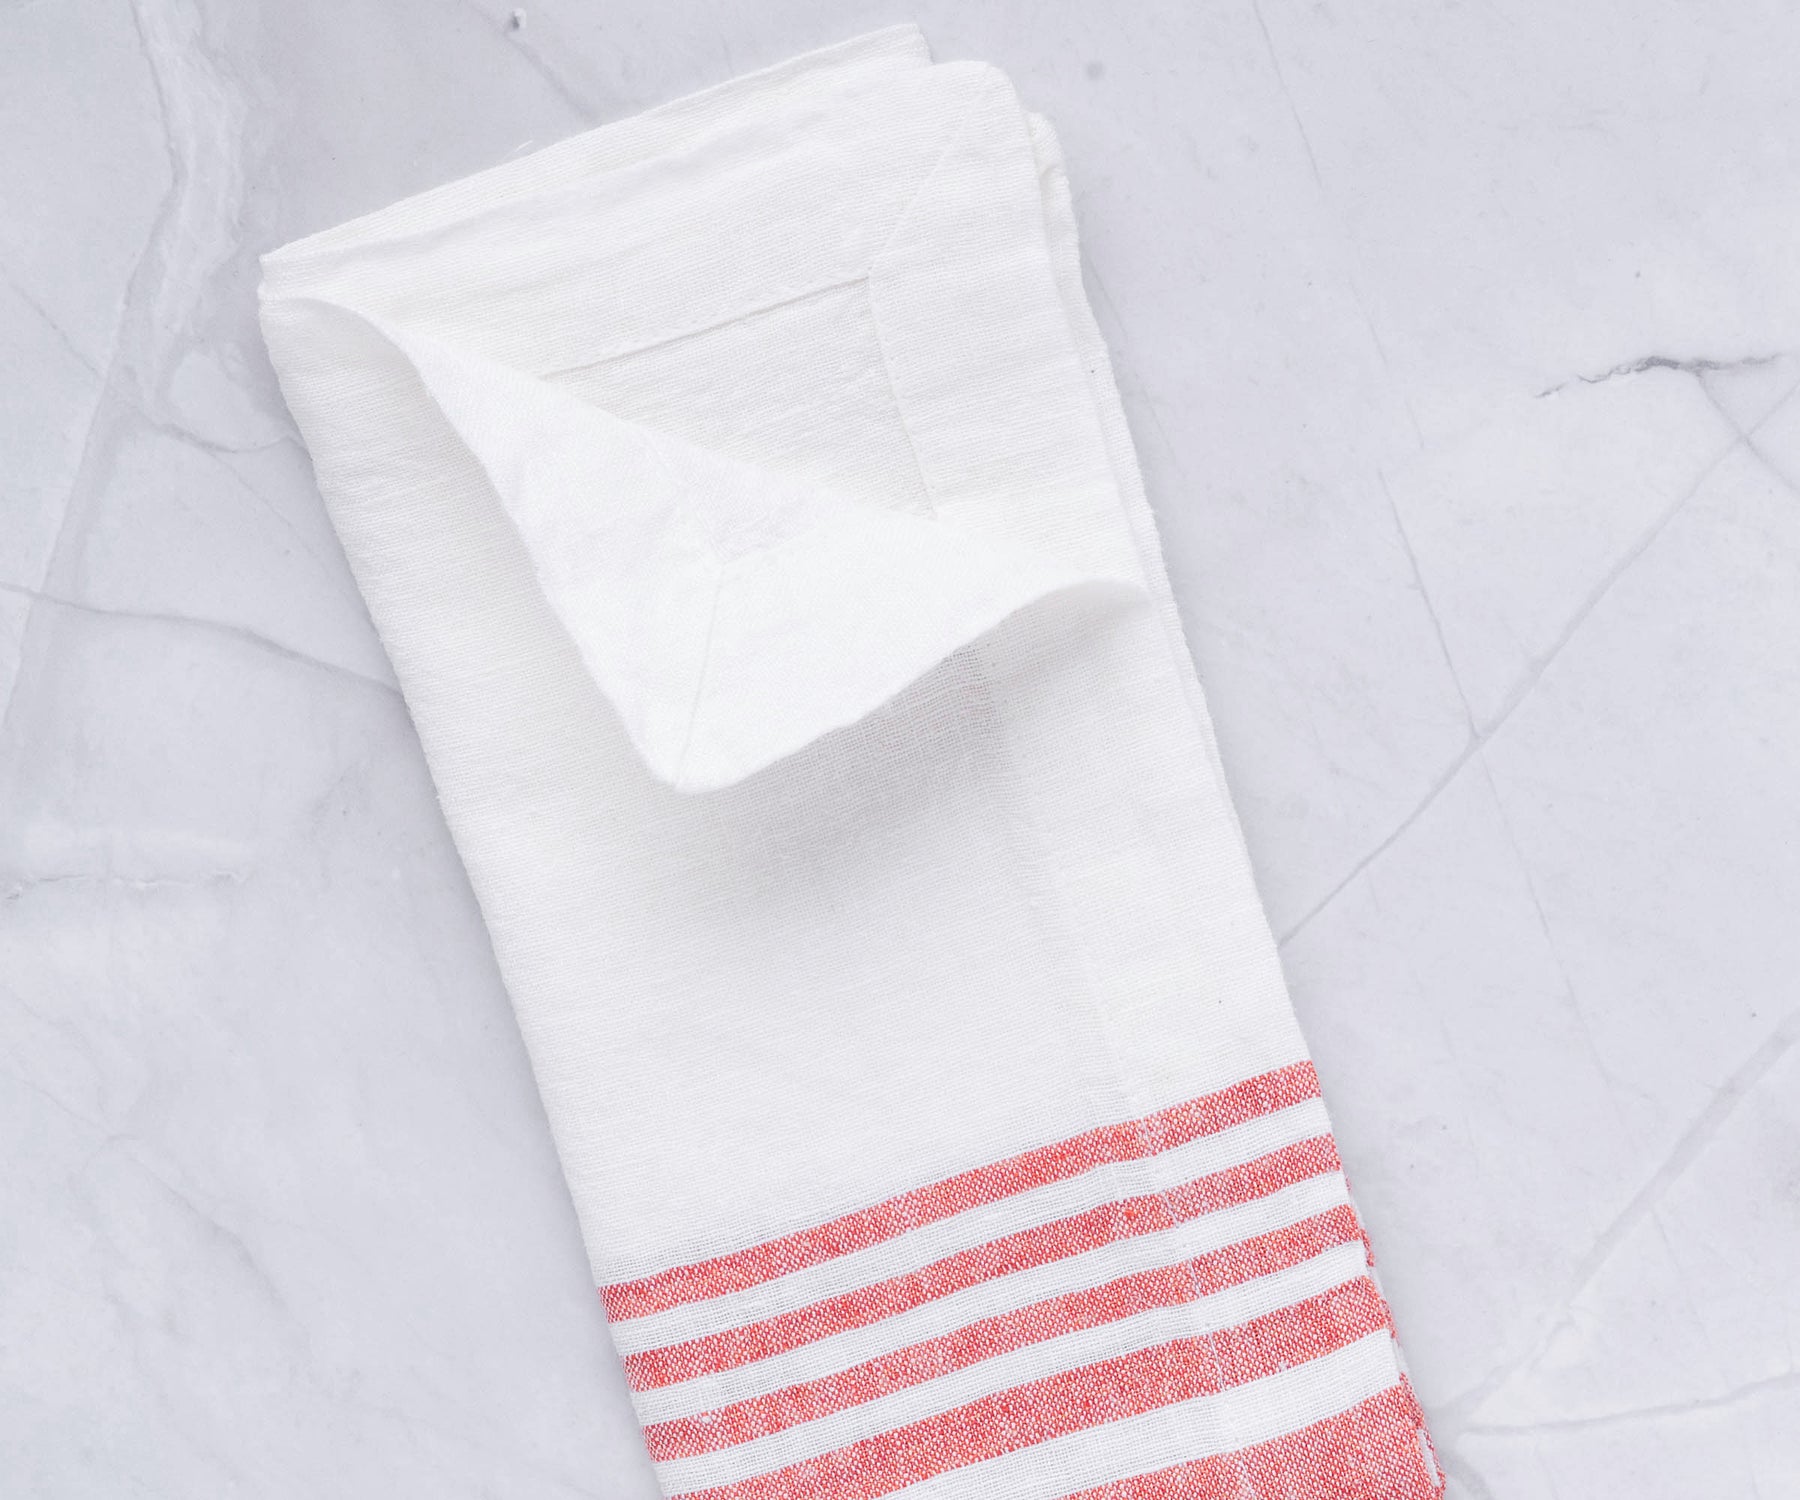 Barts Linen Napkin: Discover the perfect balance of style and comfort with our Barts Linen Napkin collection, designed to make a statement at every meal.